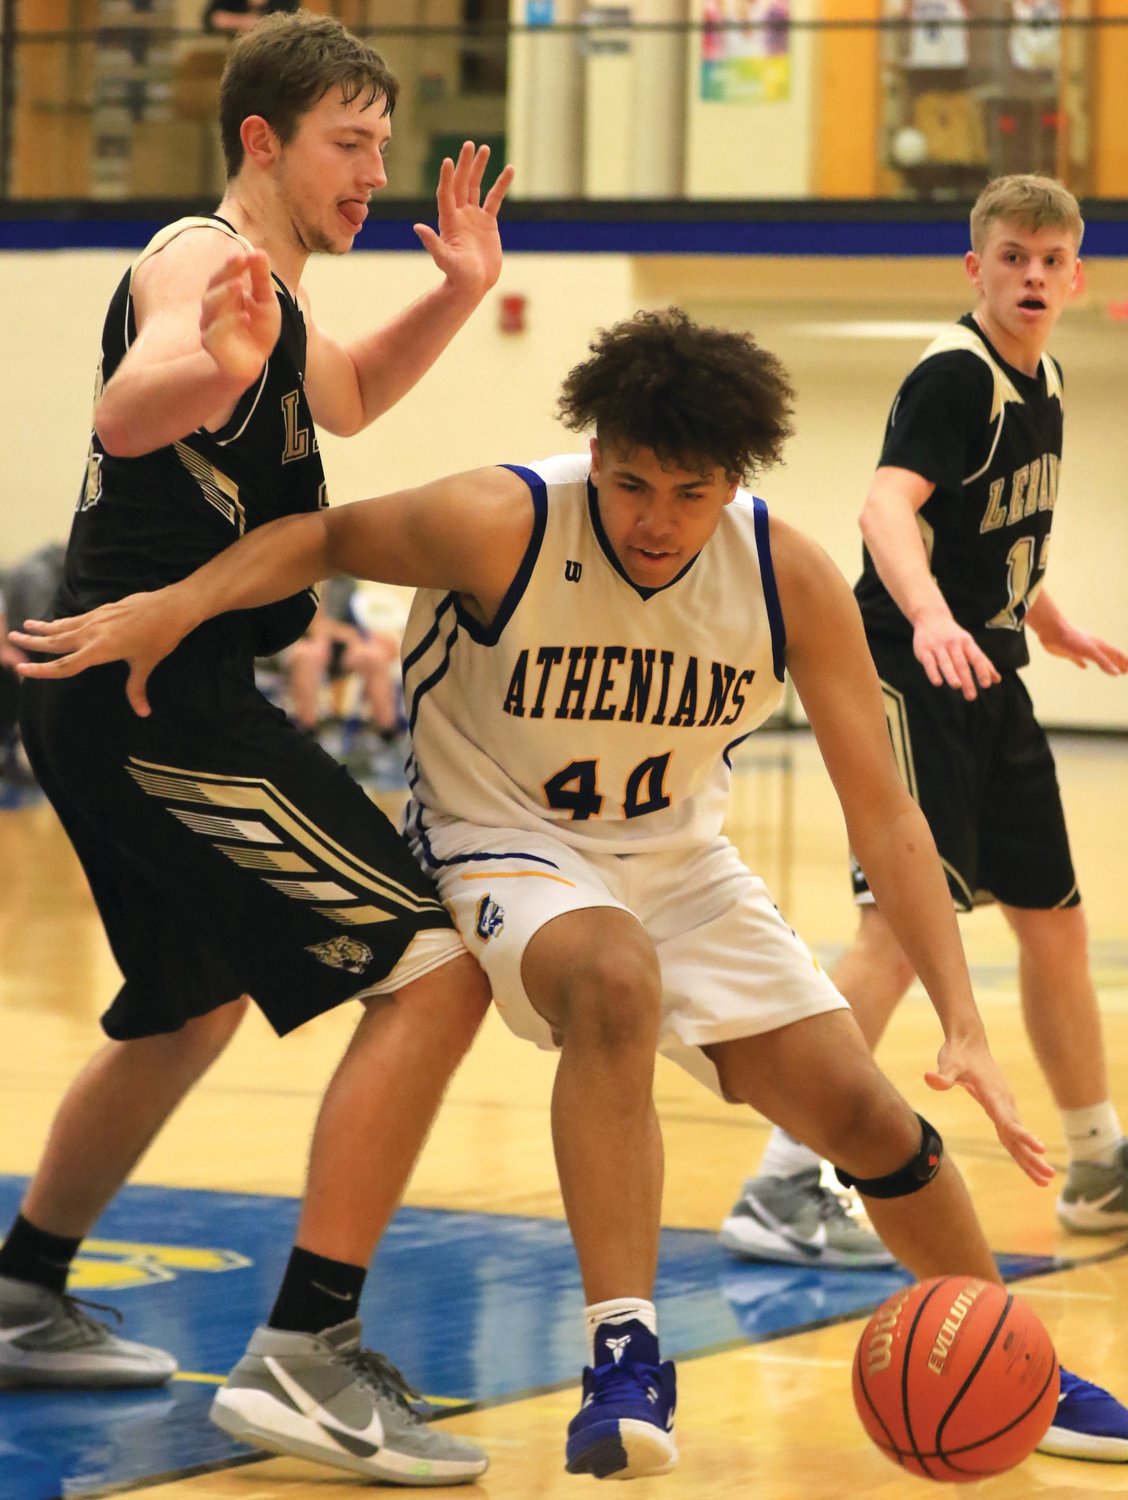 Crawfordsville’s Mekhi Wallace led the Athenians with six crucial points in the fourth quarter on their way to a 49-38 win over Lebanon.